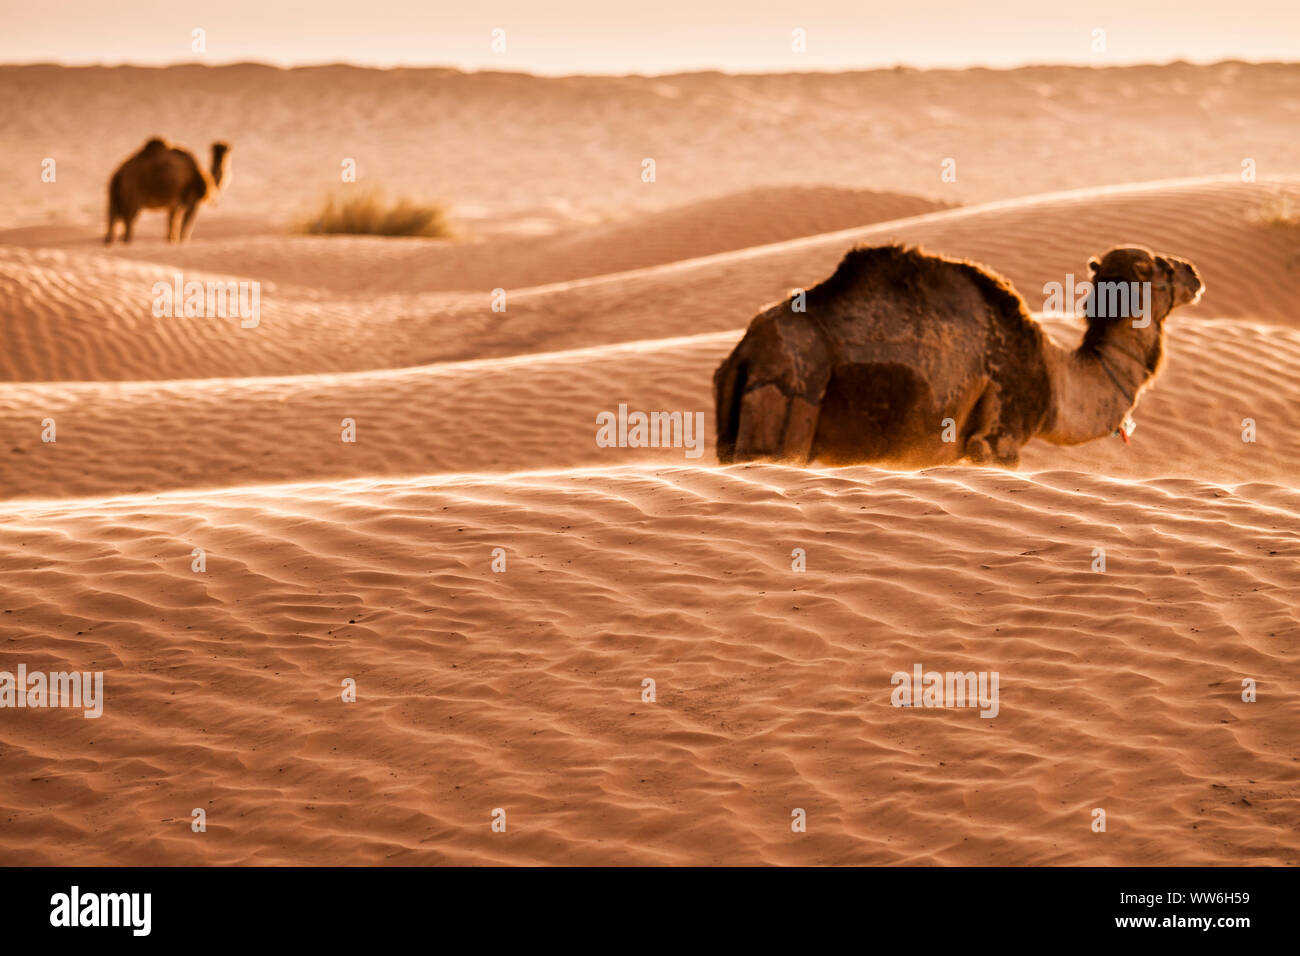 Camels in the desert, Tunisia Stock Photo